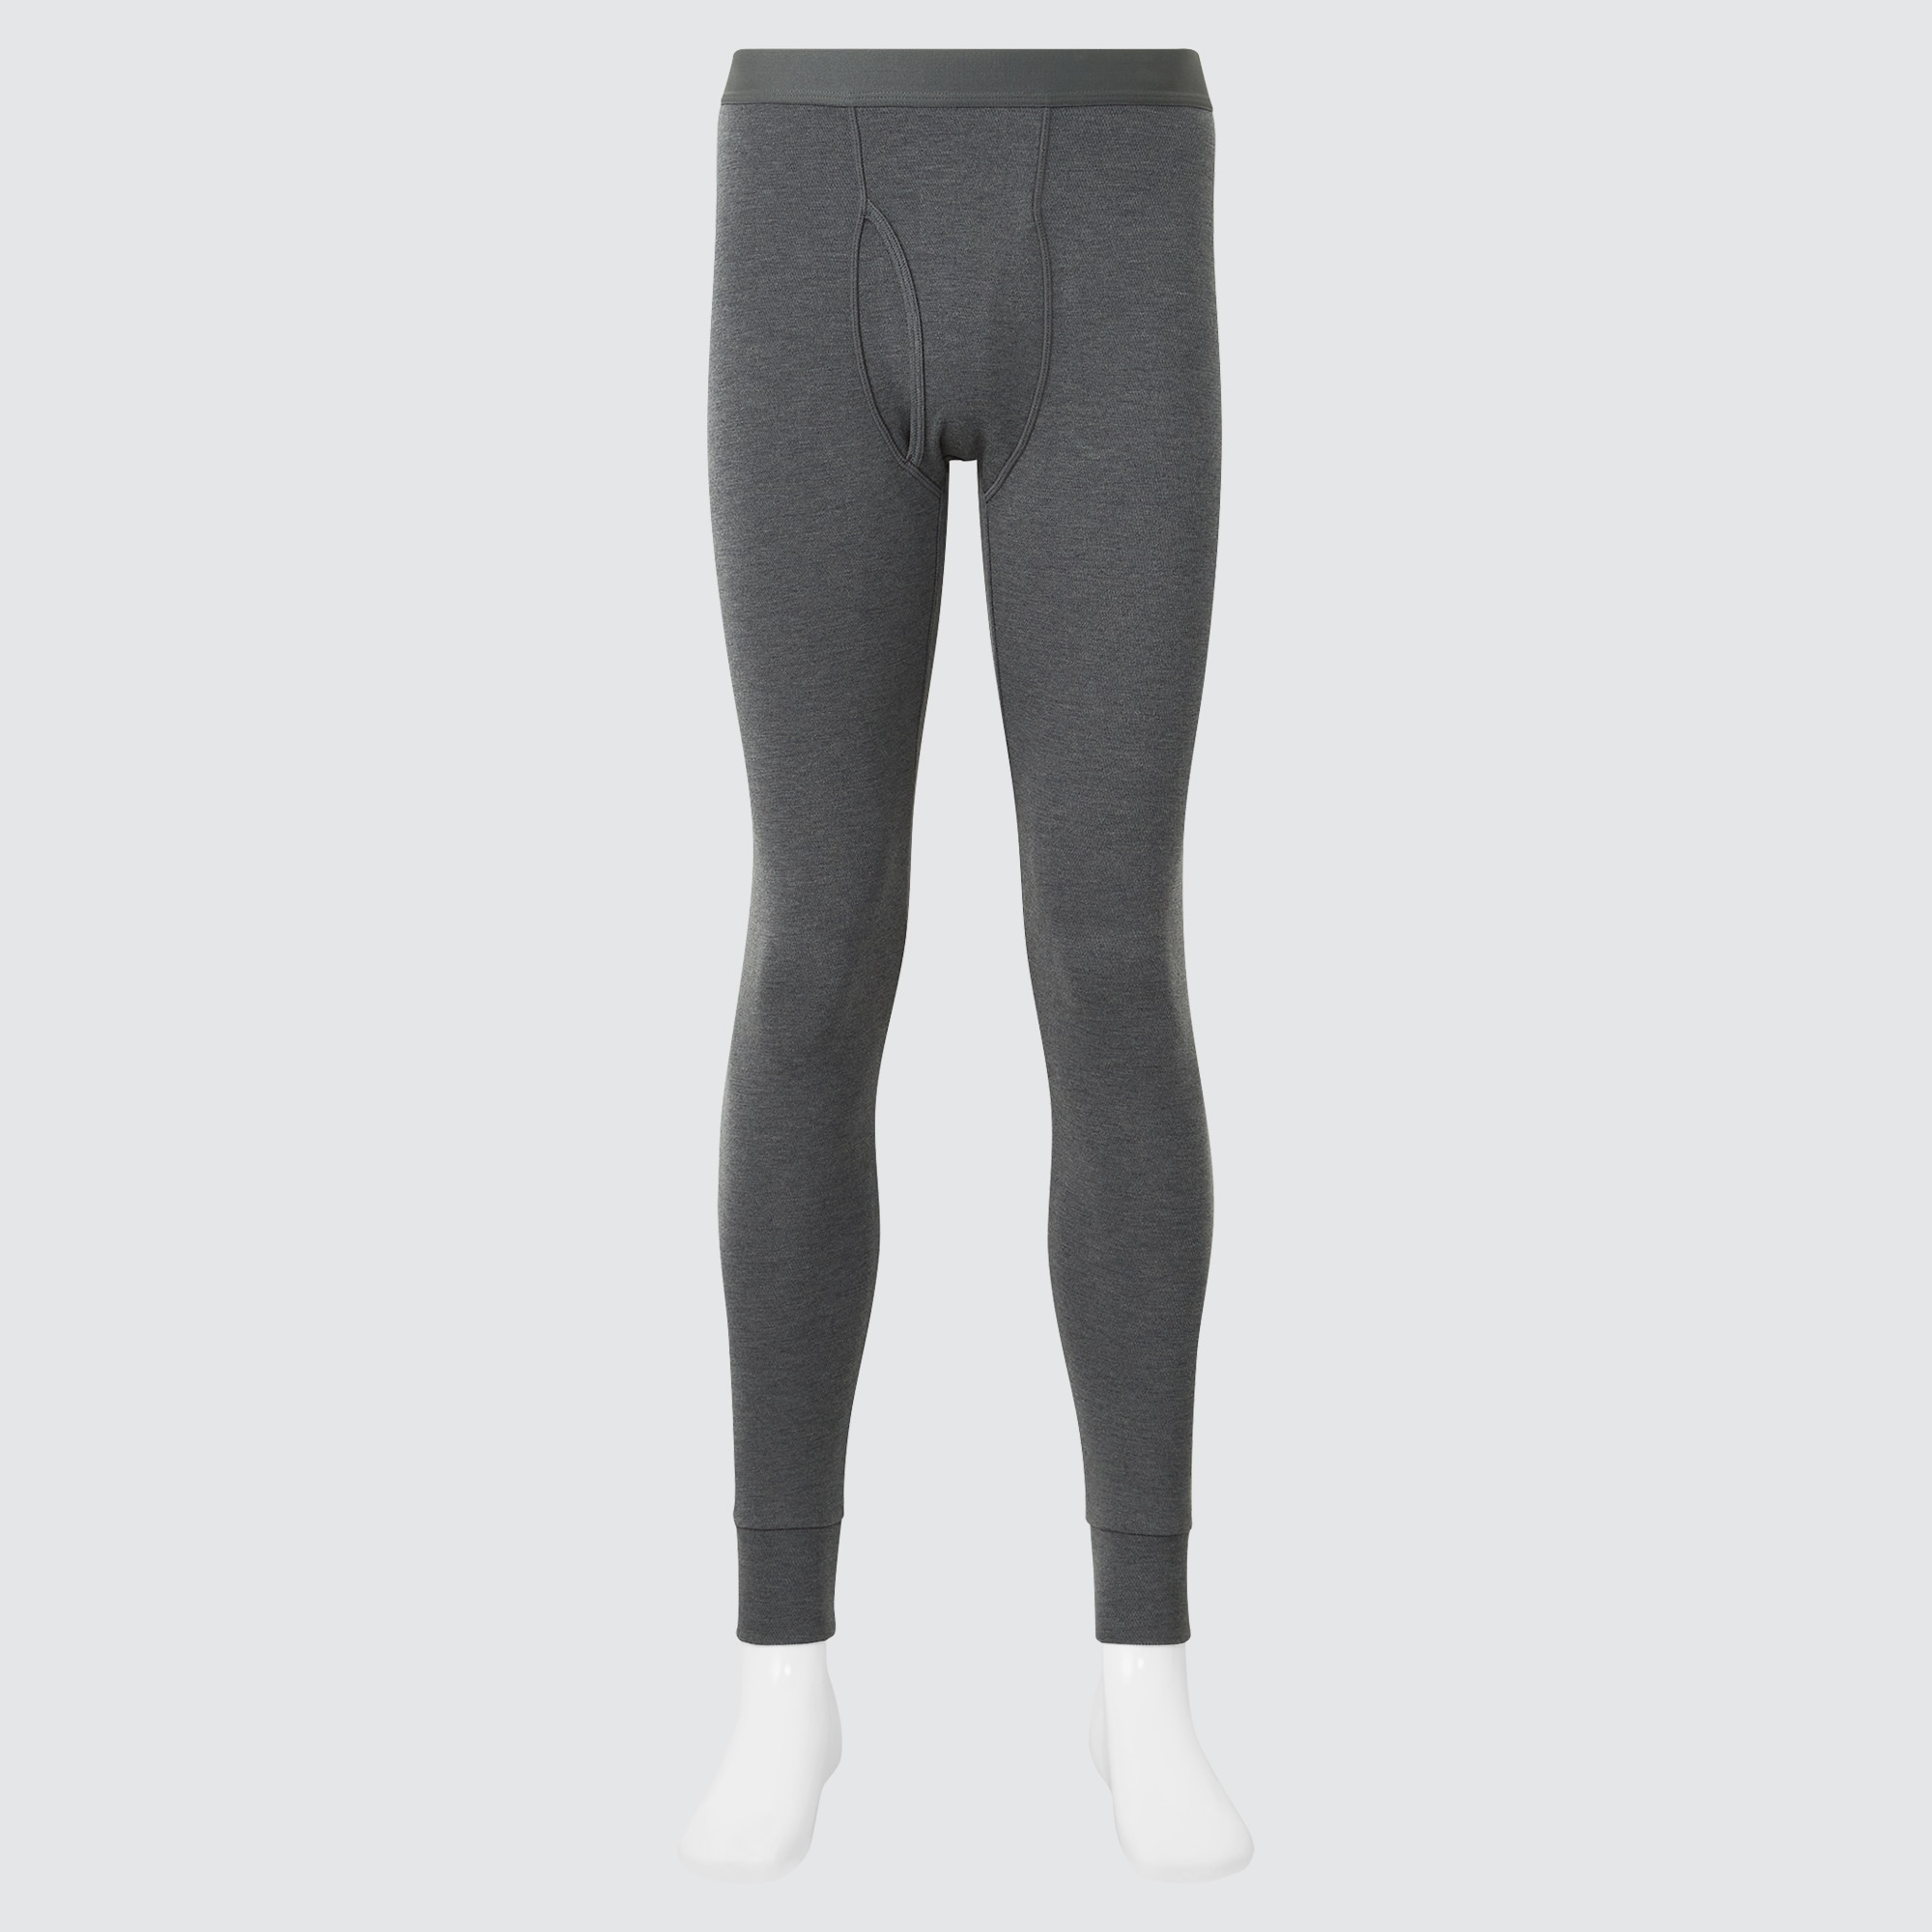 UNIQLO Malaysia - Our HEATTECH Leggings and Tights are